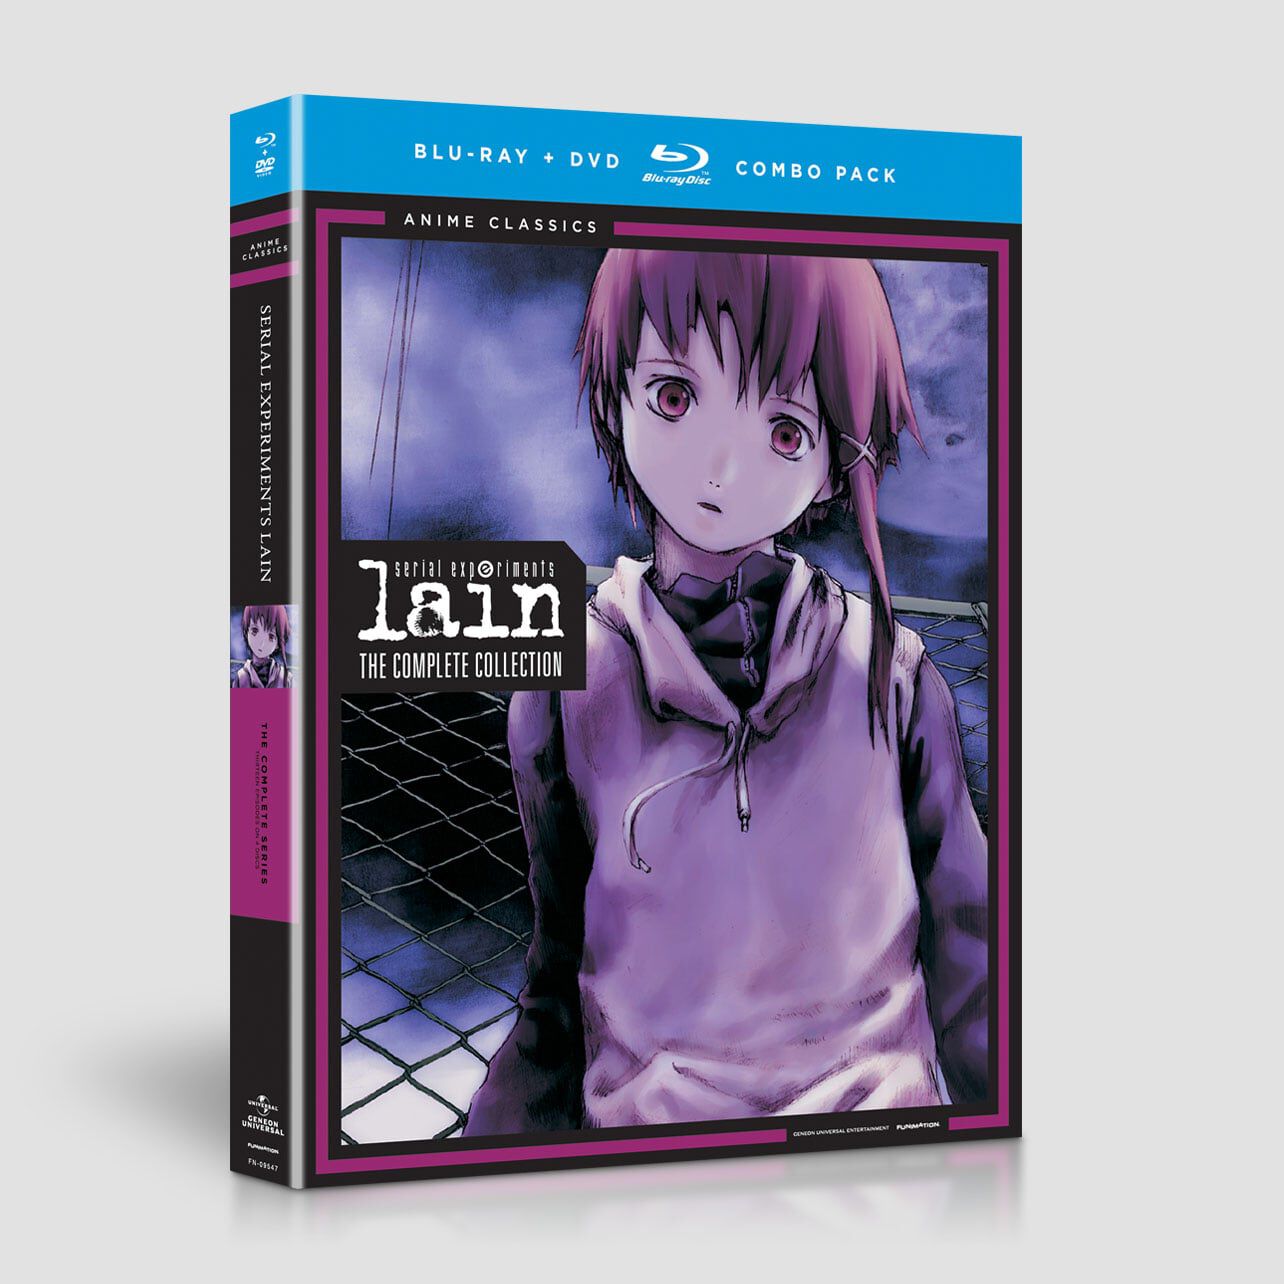 watch serial experiments lain dub